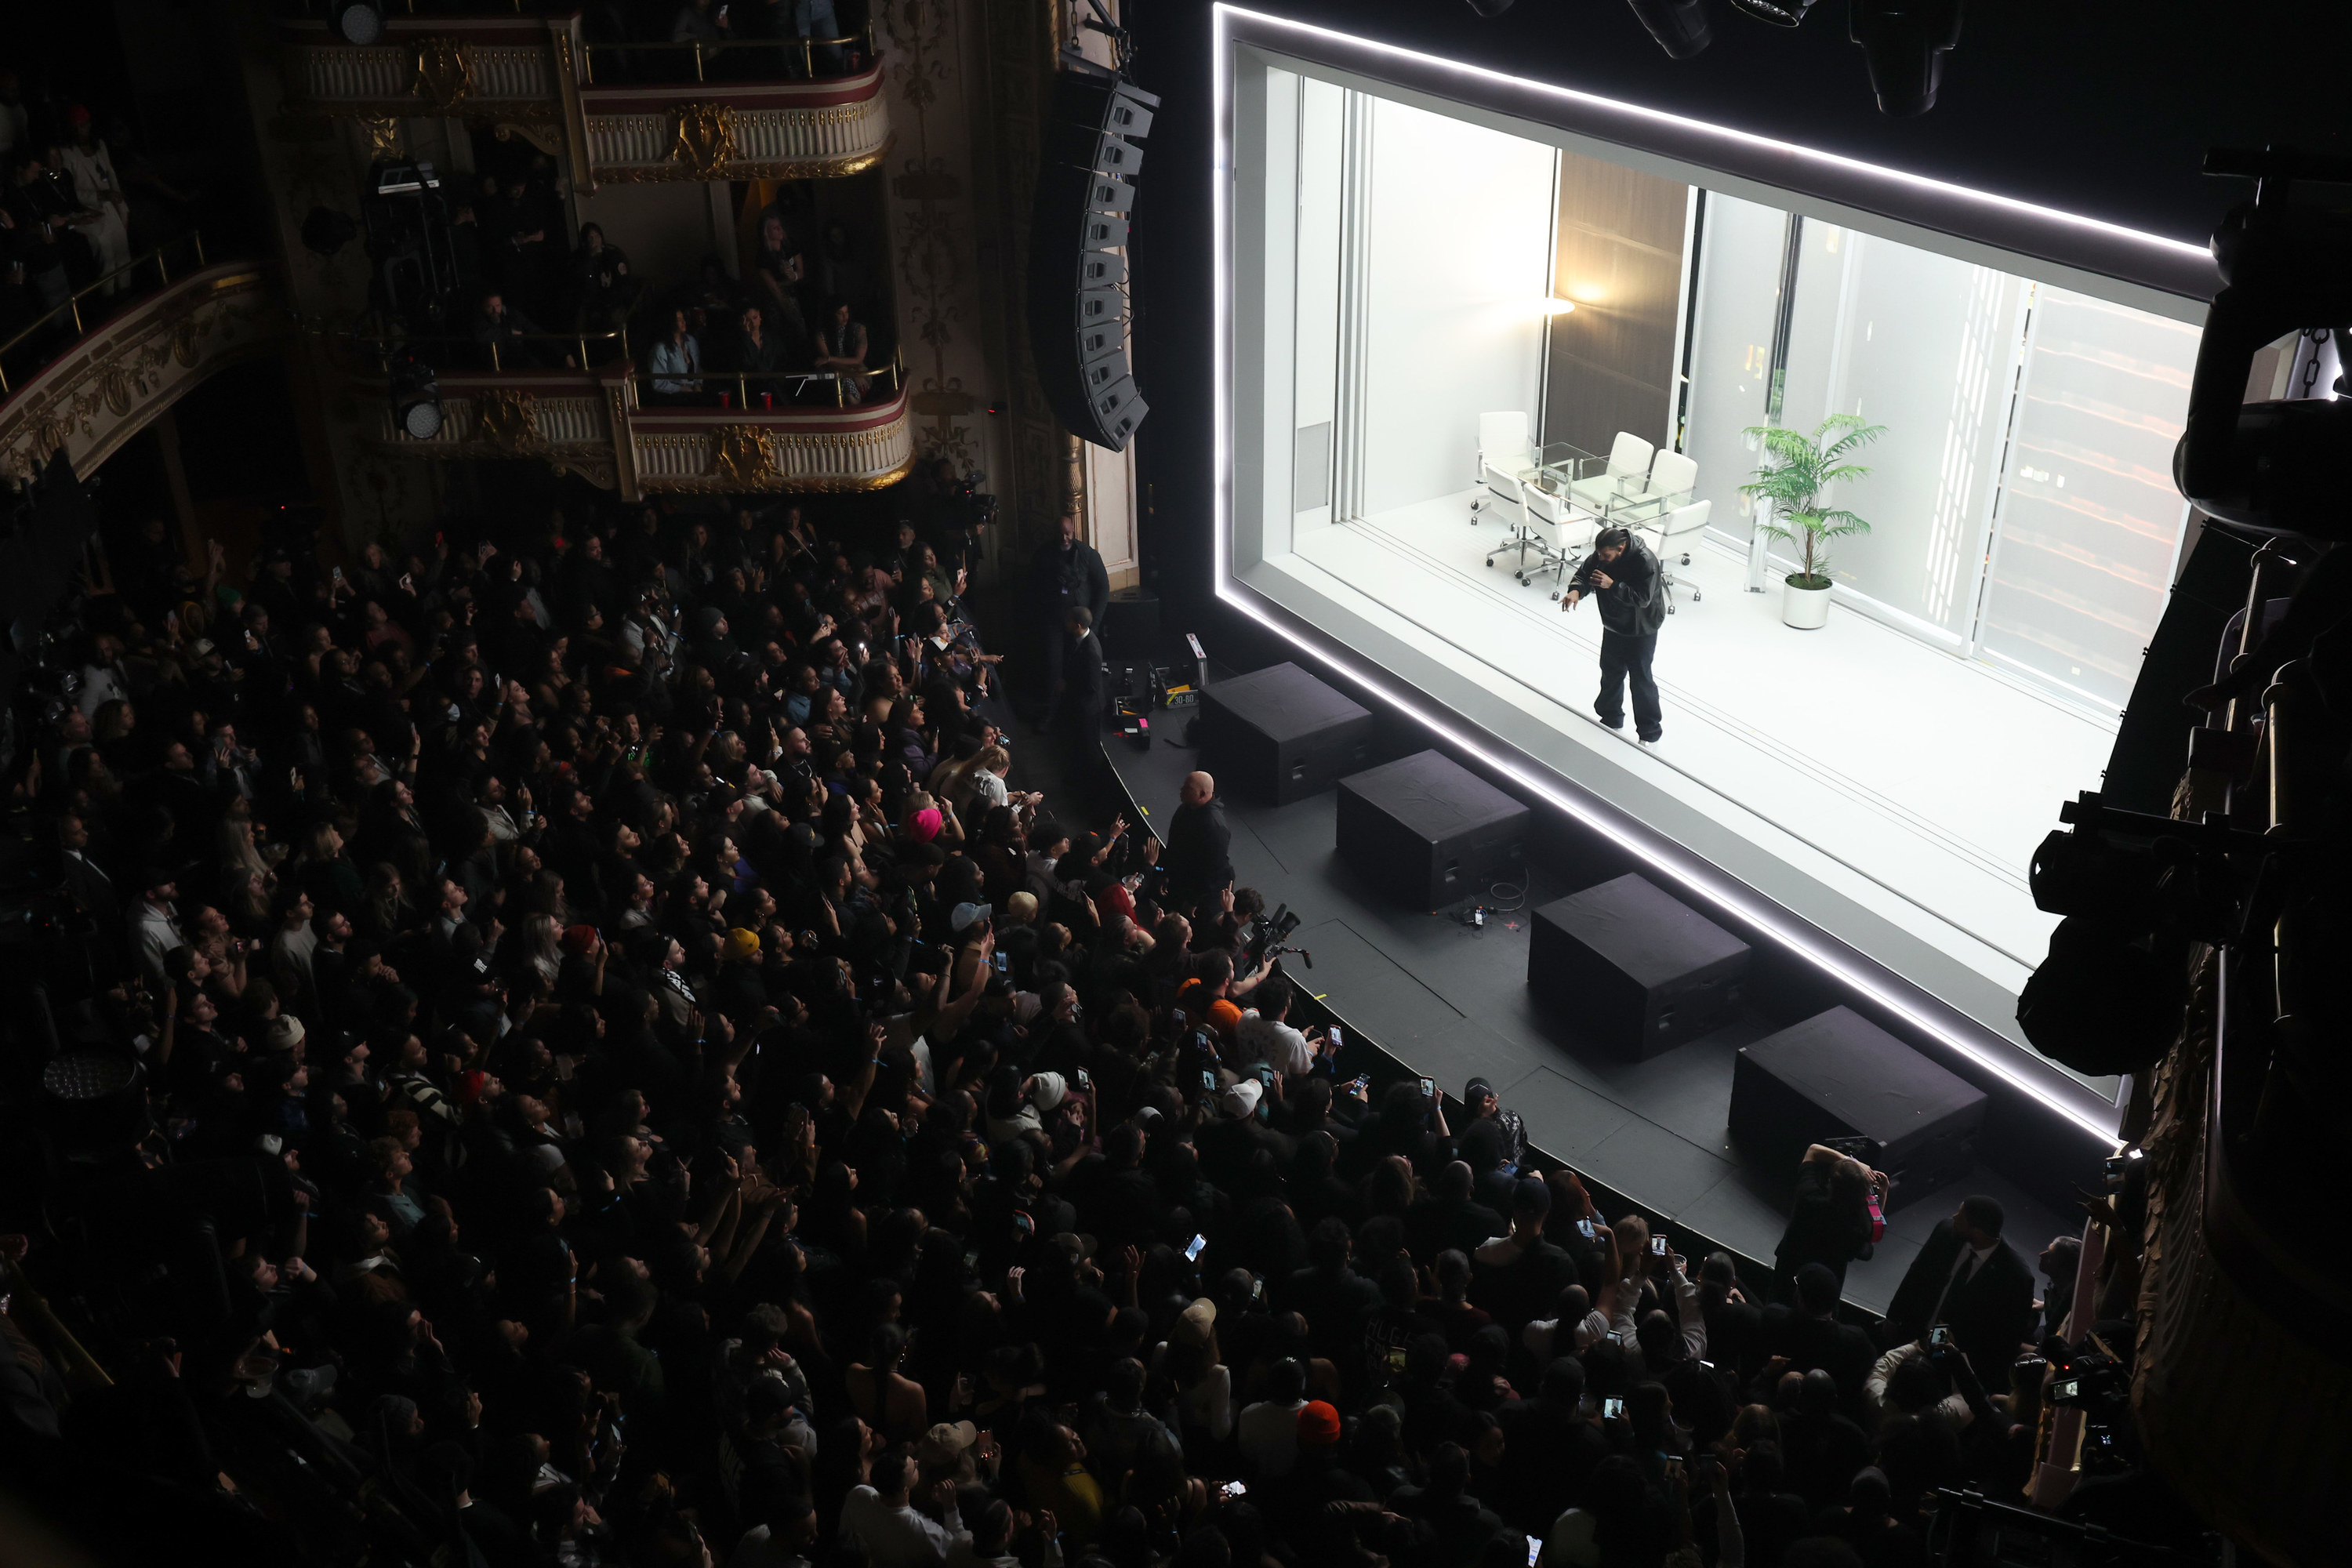 photo taken from a balcony of Drake rapping in front of a large crowd